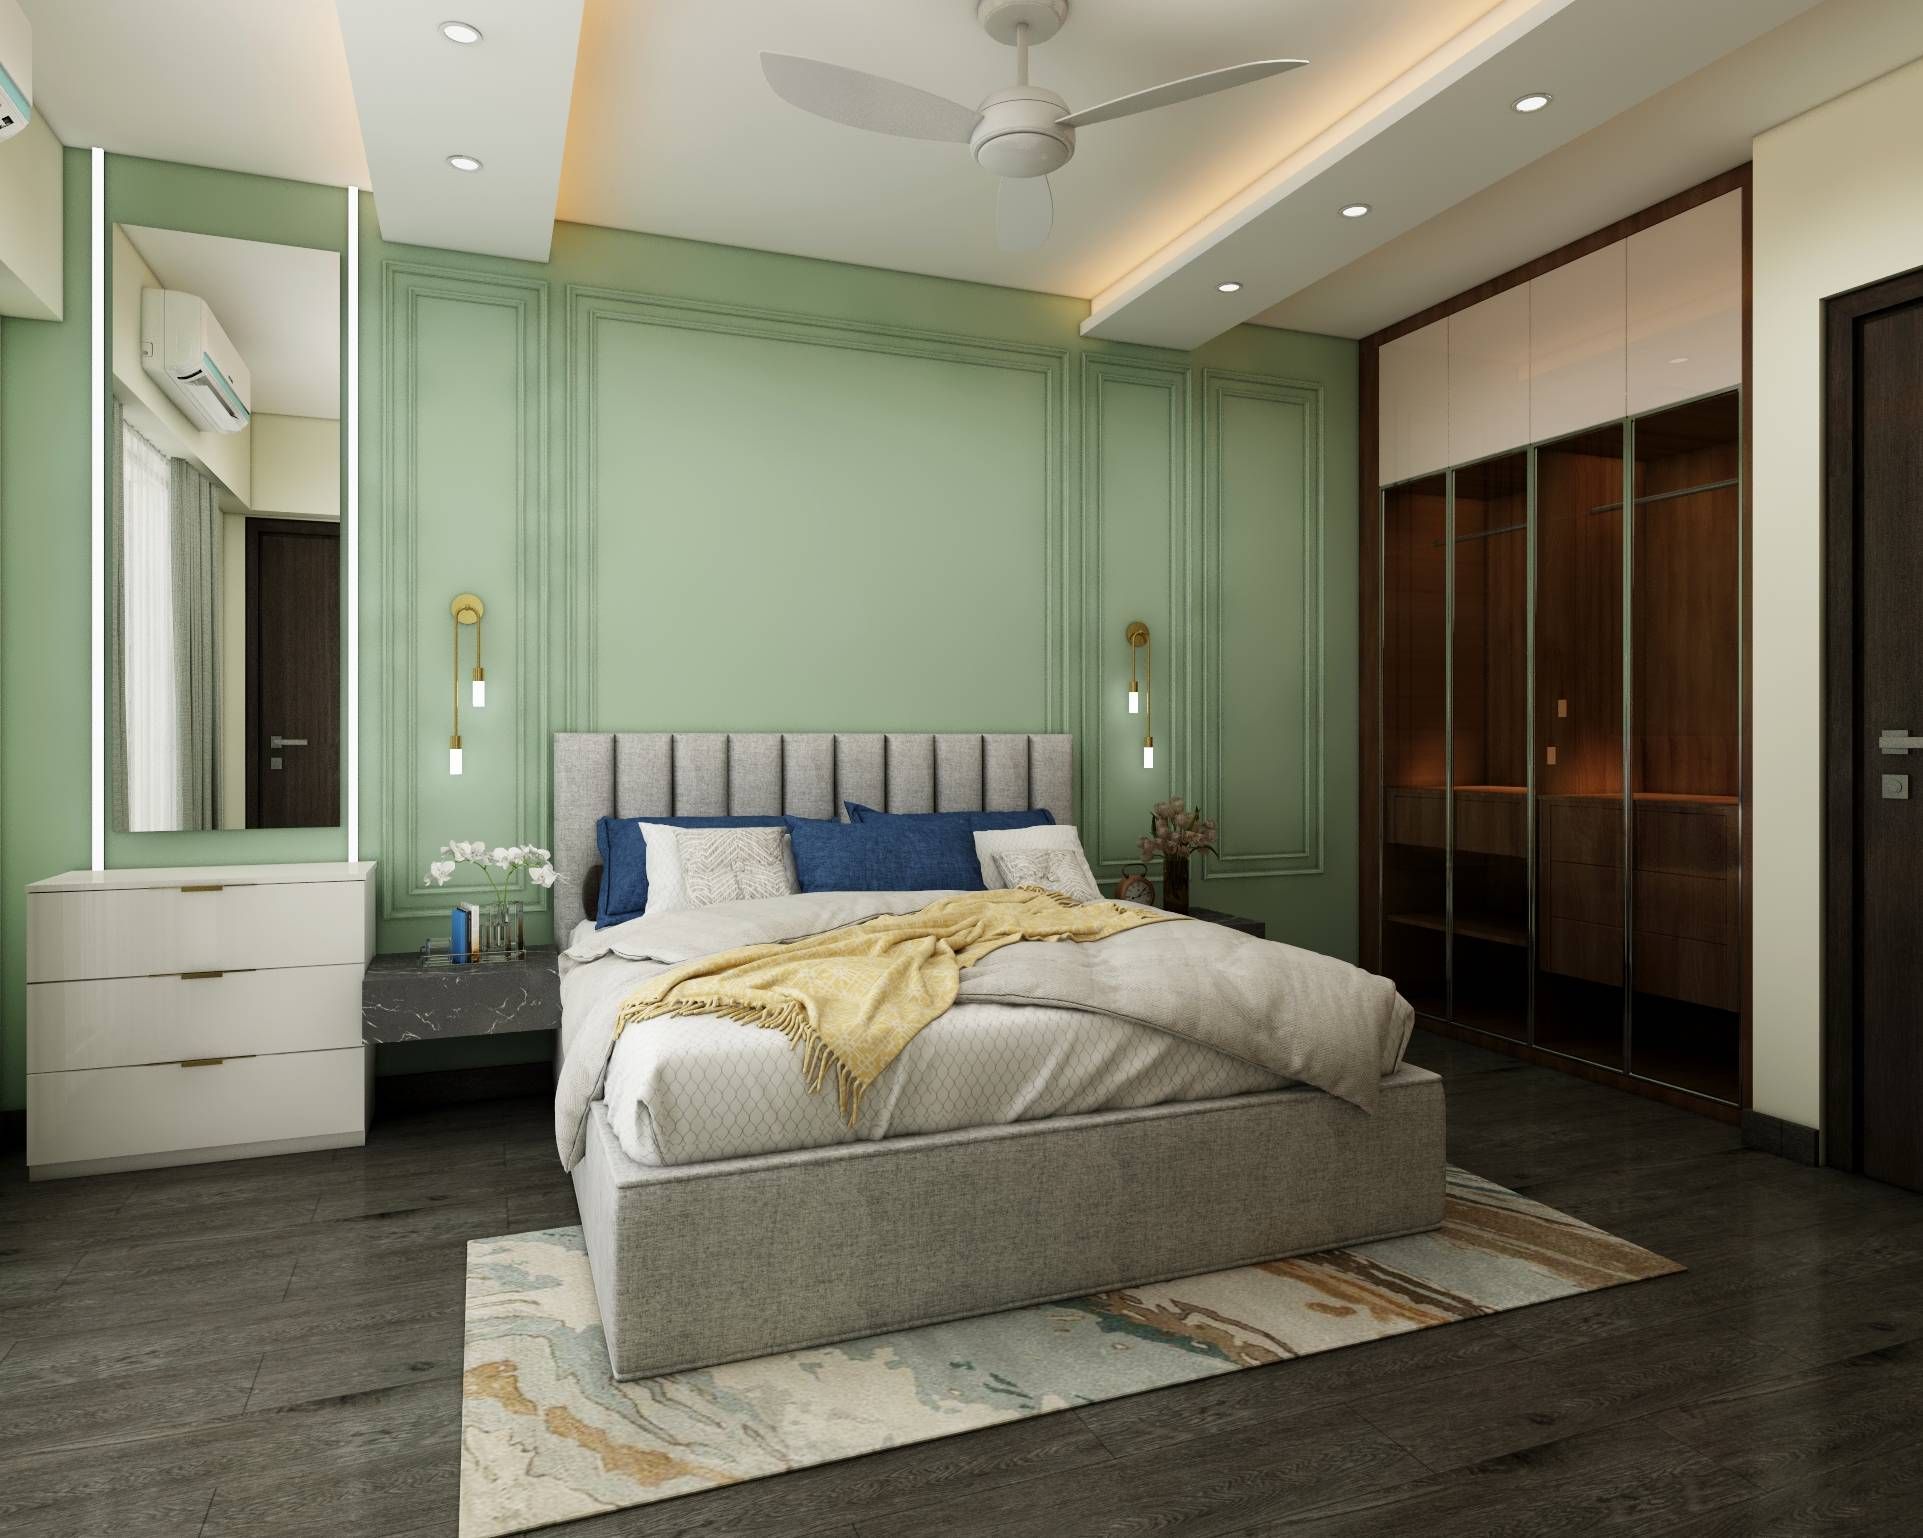 Modern Master Bedroom Design With Grey Upholstered Bed And Mint Green Walls